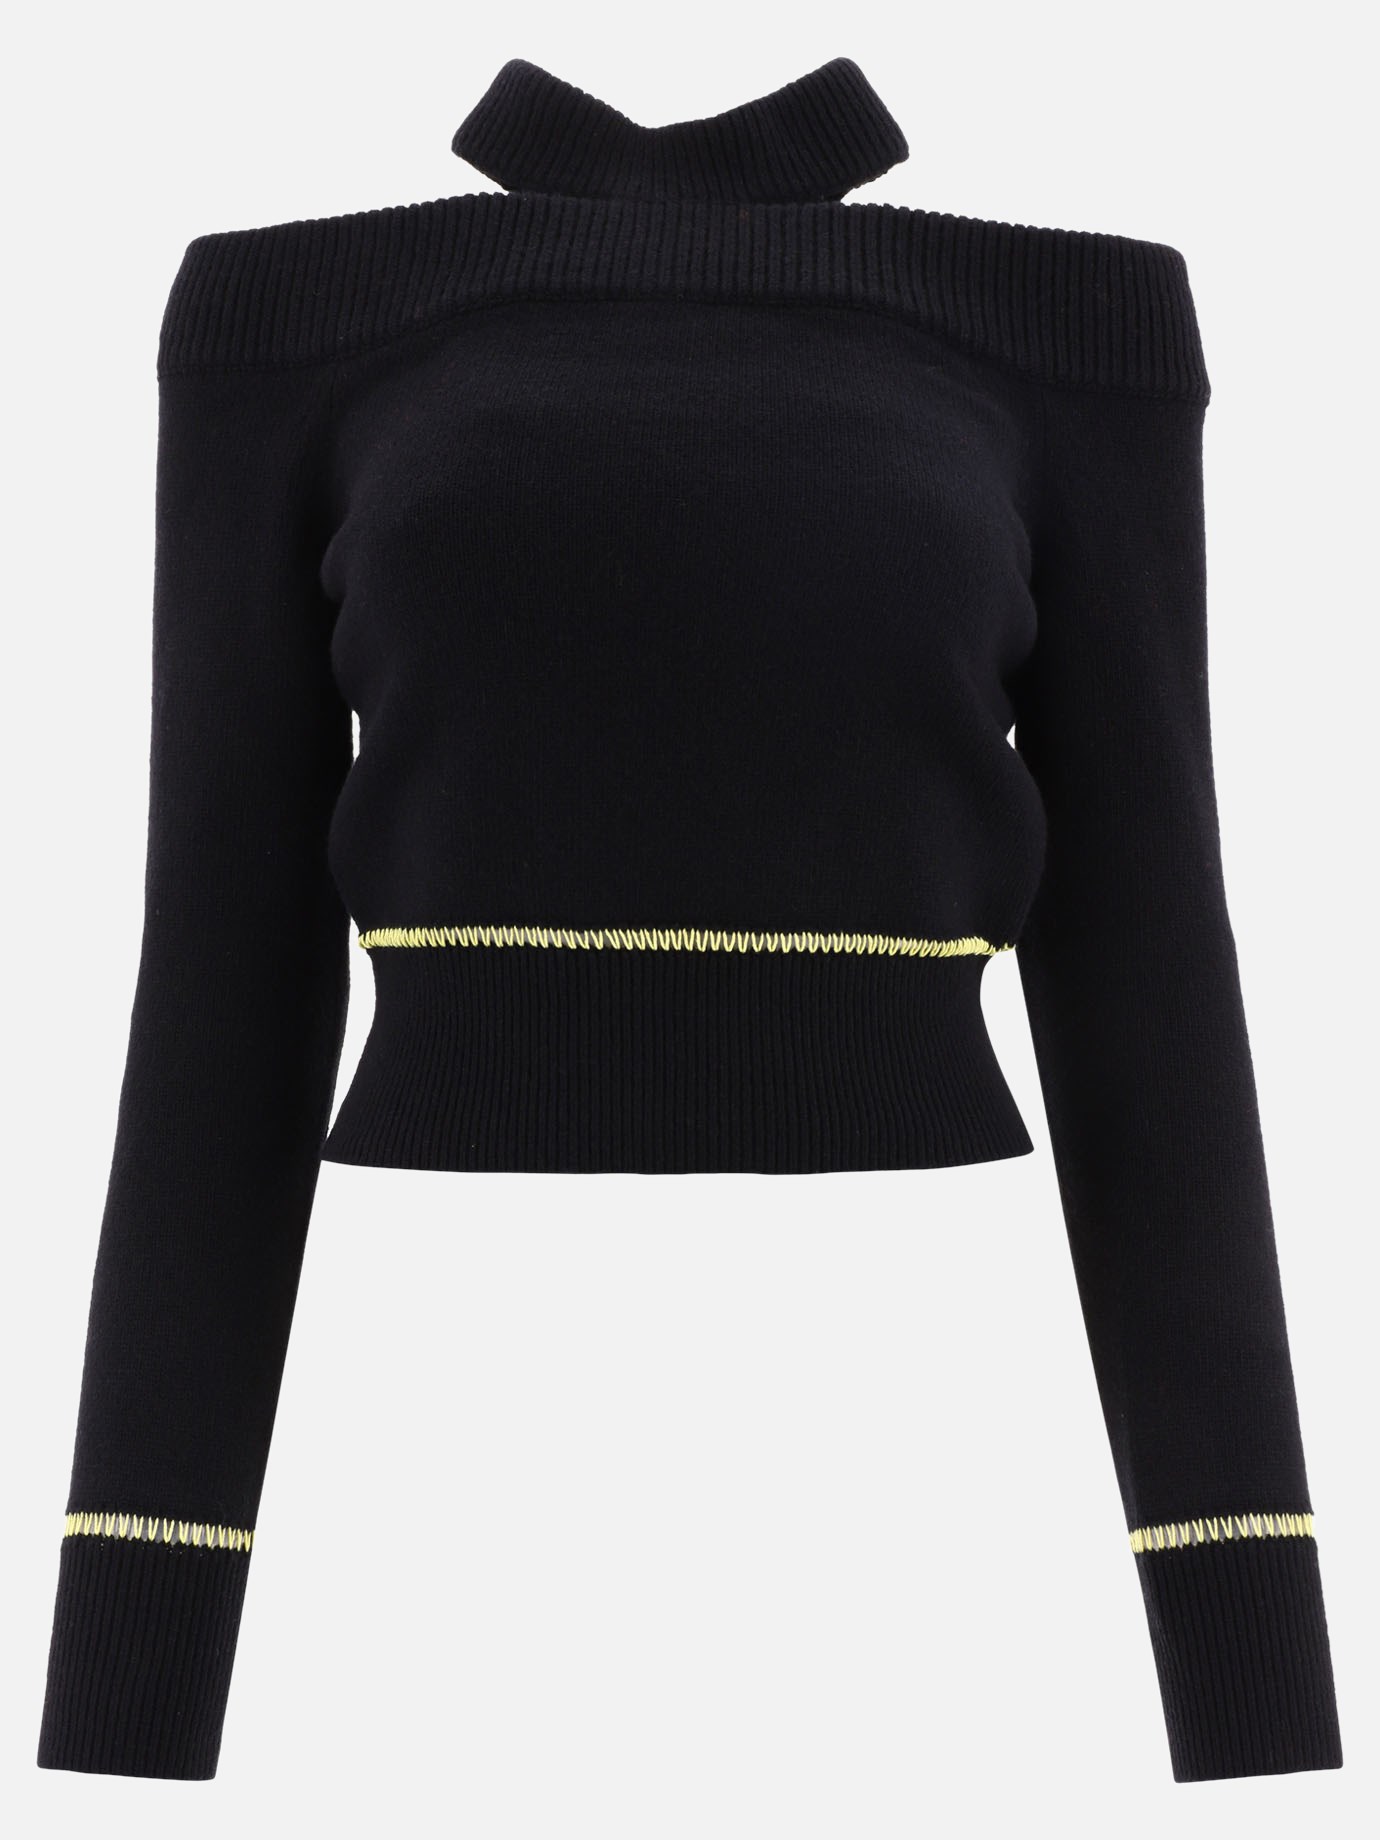 Cut-out sweaterby Alexander McQueen - 0